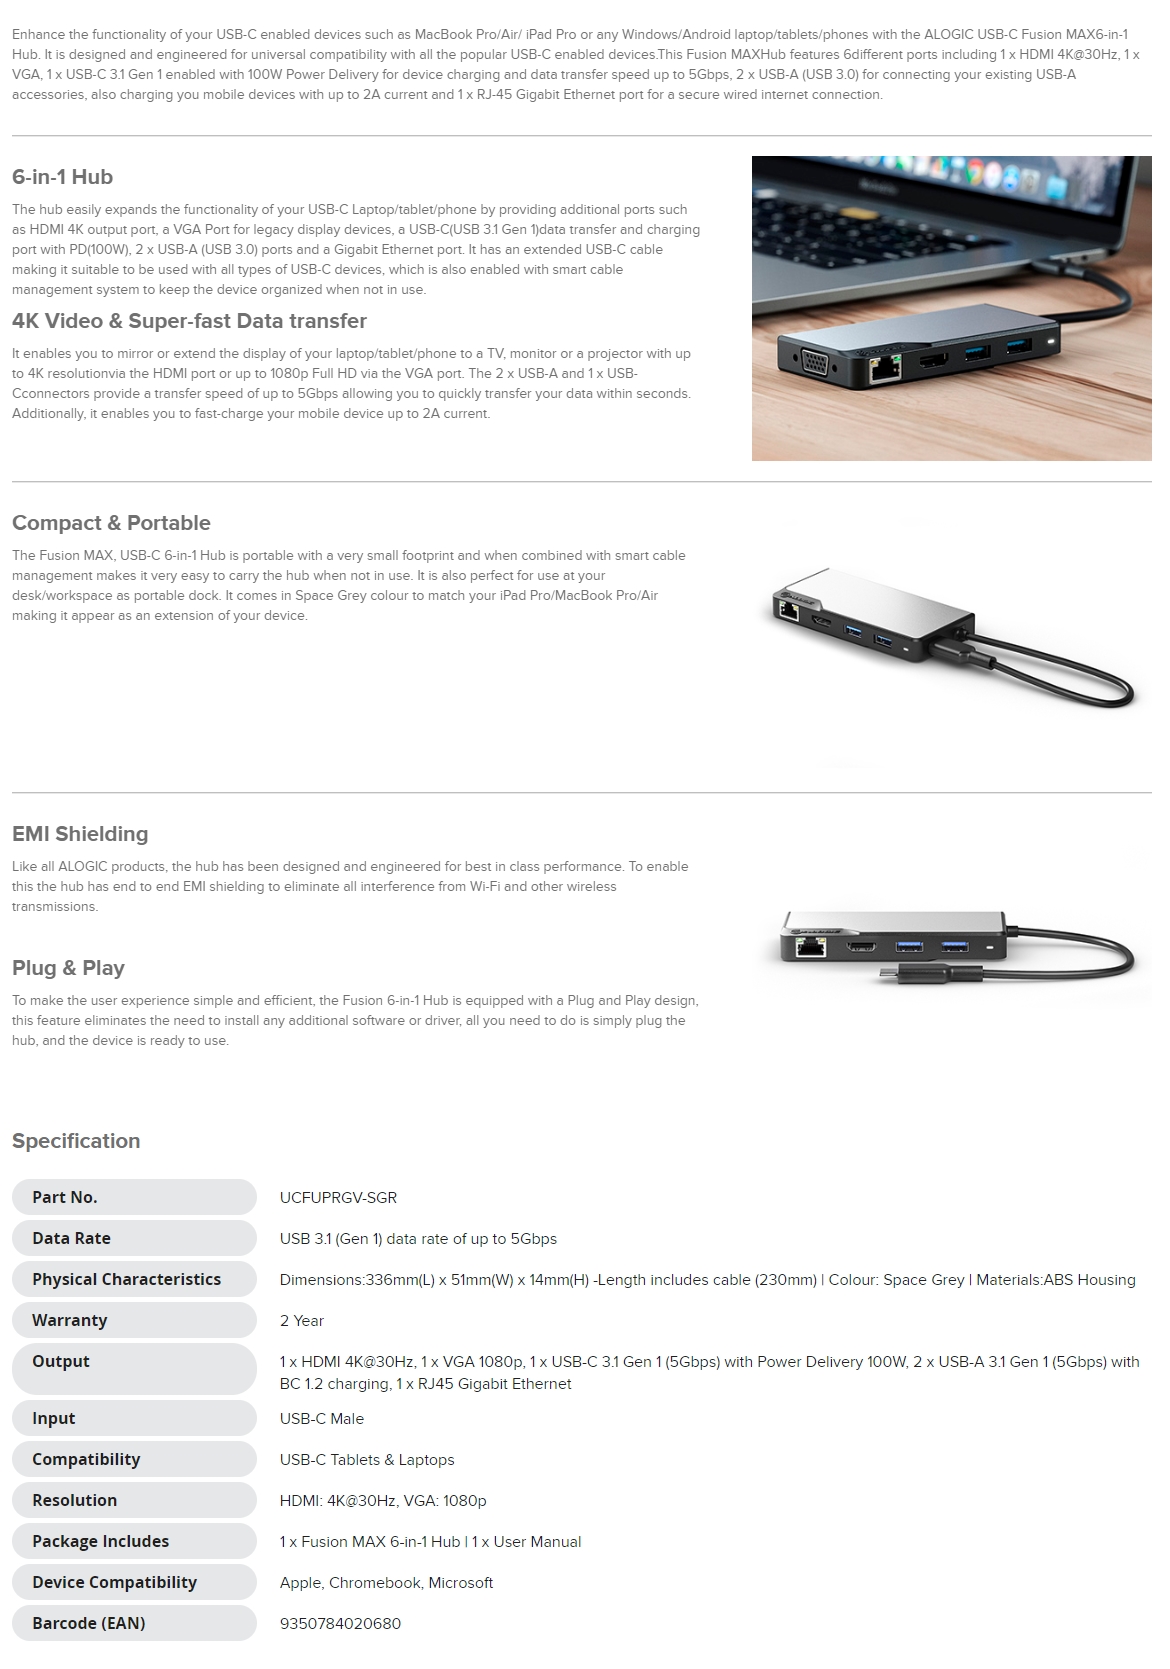 A large marketing image providing additional information about the product ALOGIC USB-C Fusion MAX 6-in-1 Hub - Additional alt info not provided